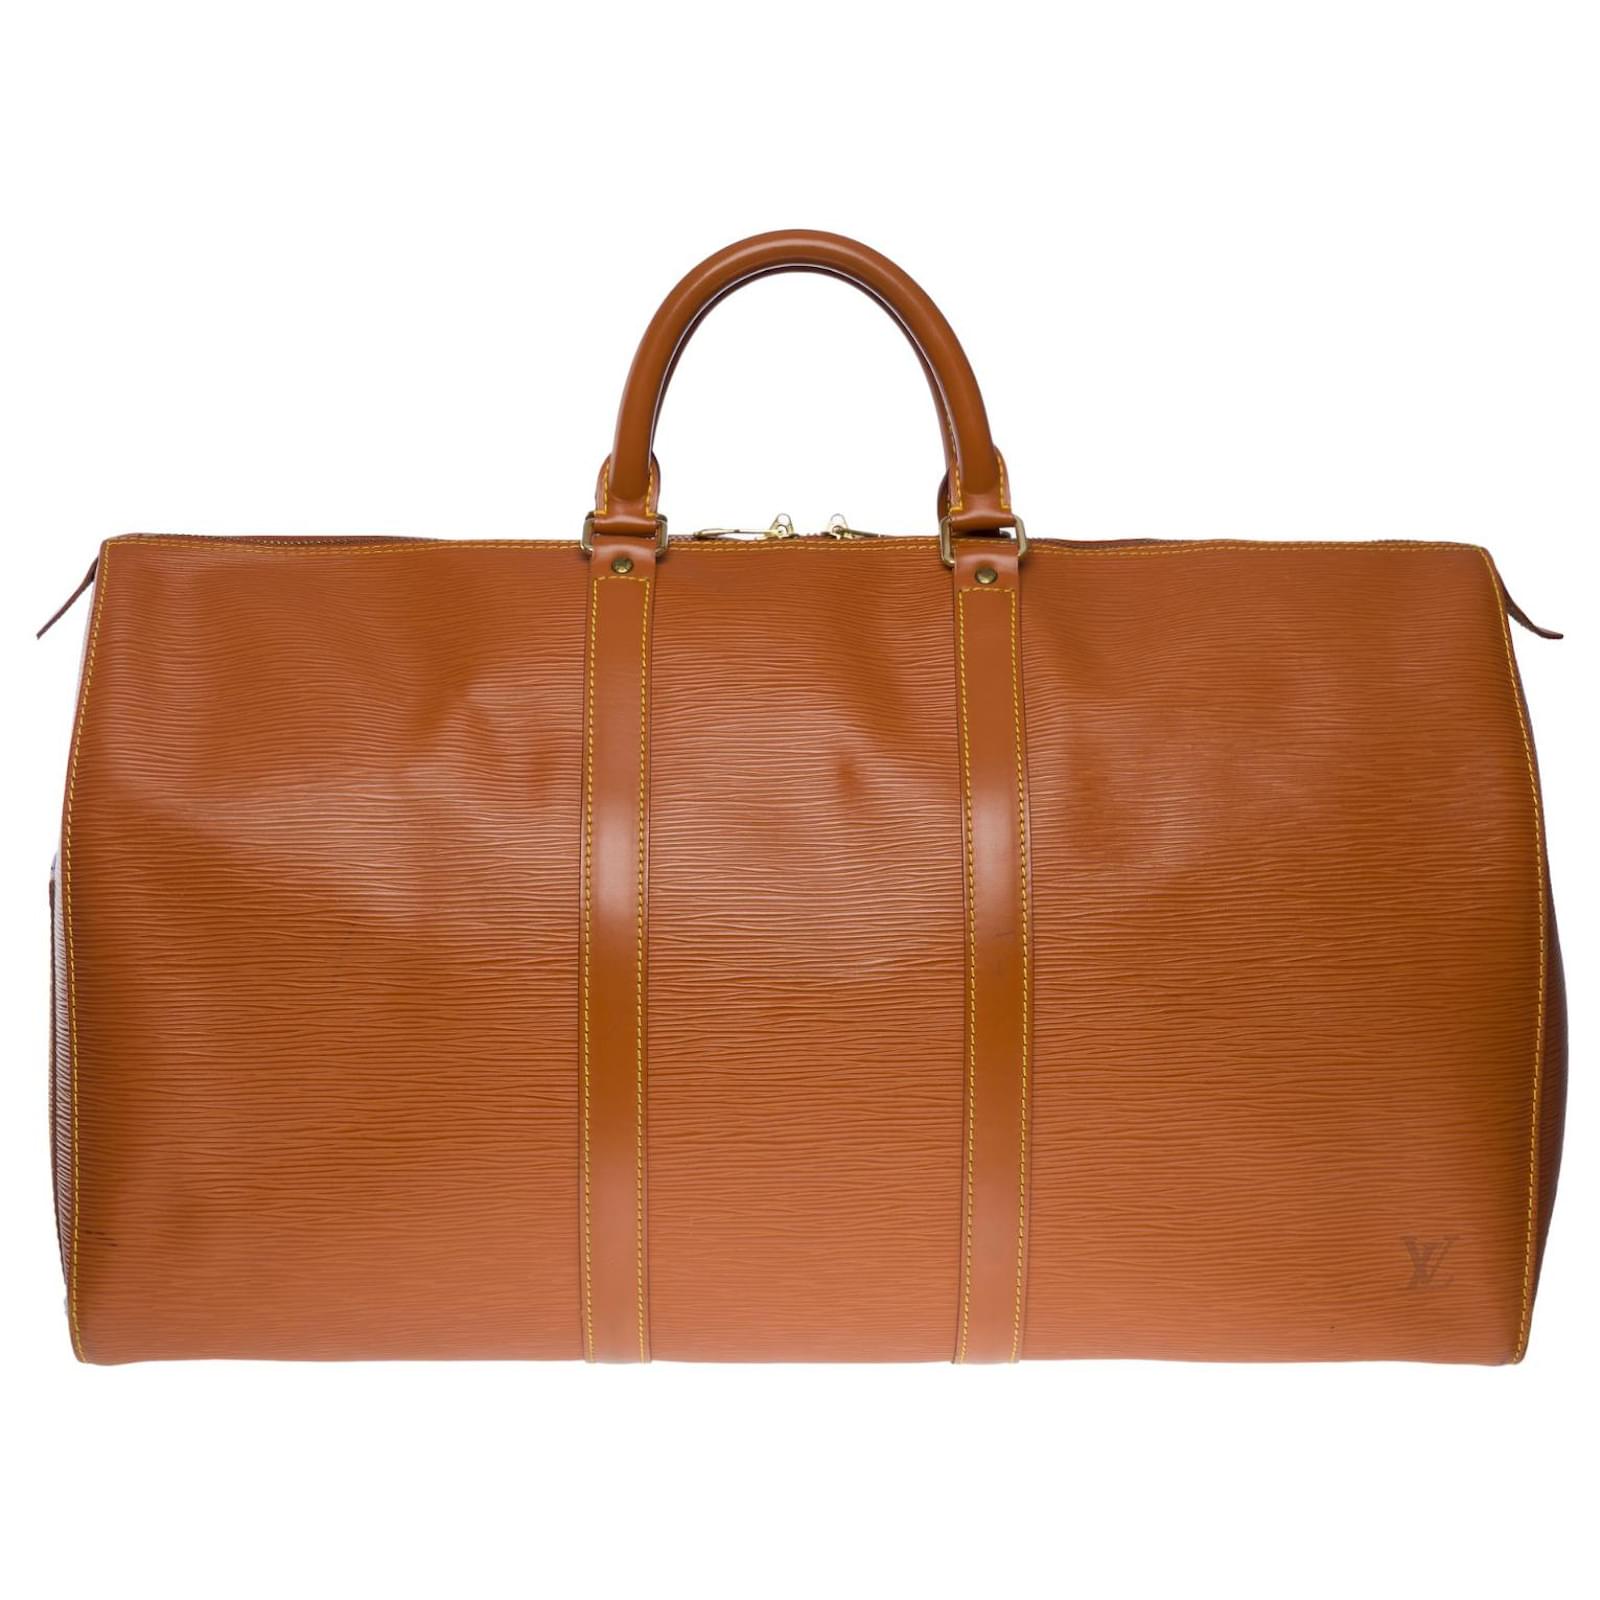 Louis Vuitton Keepall Travel Bag 50 in cognac epi leather Brown